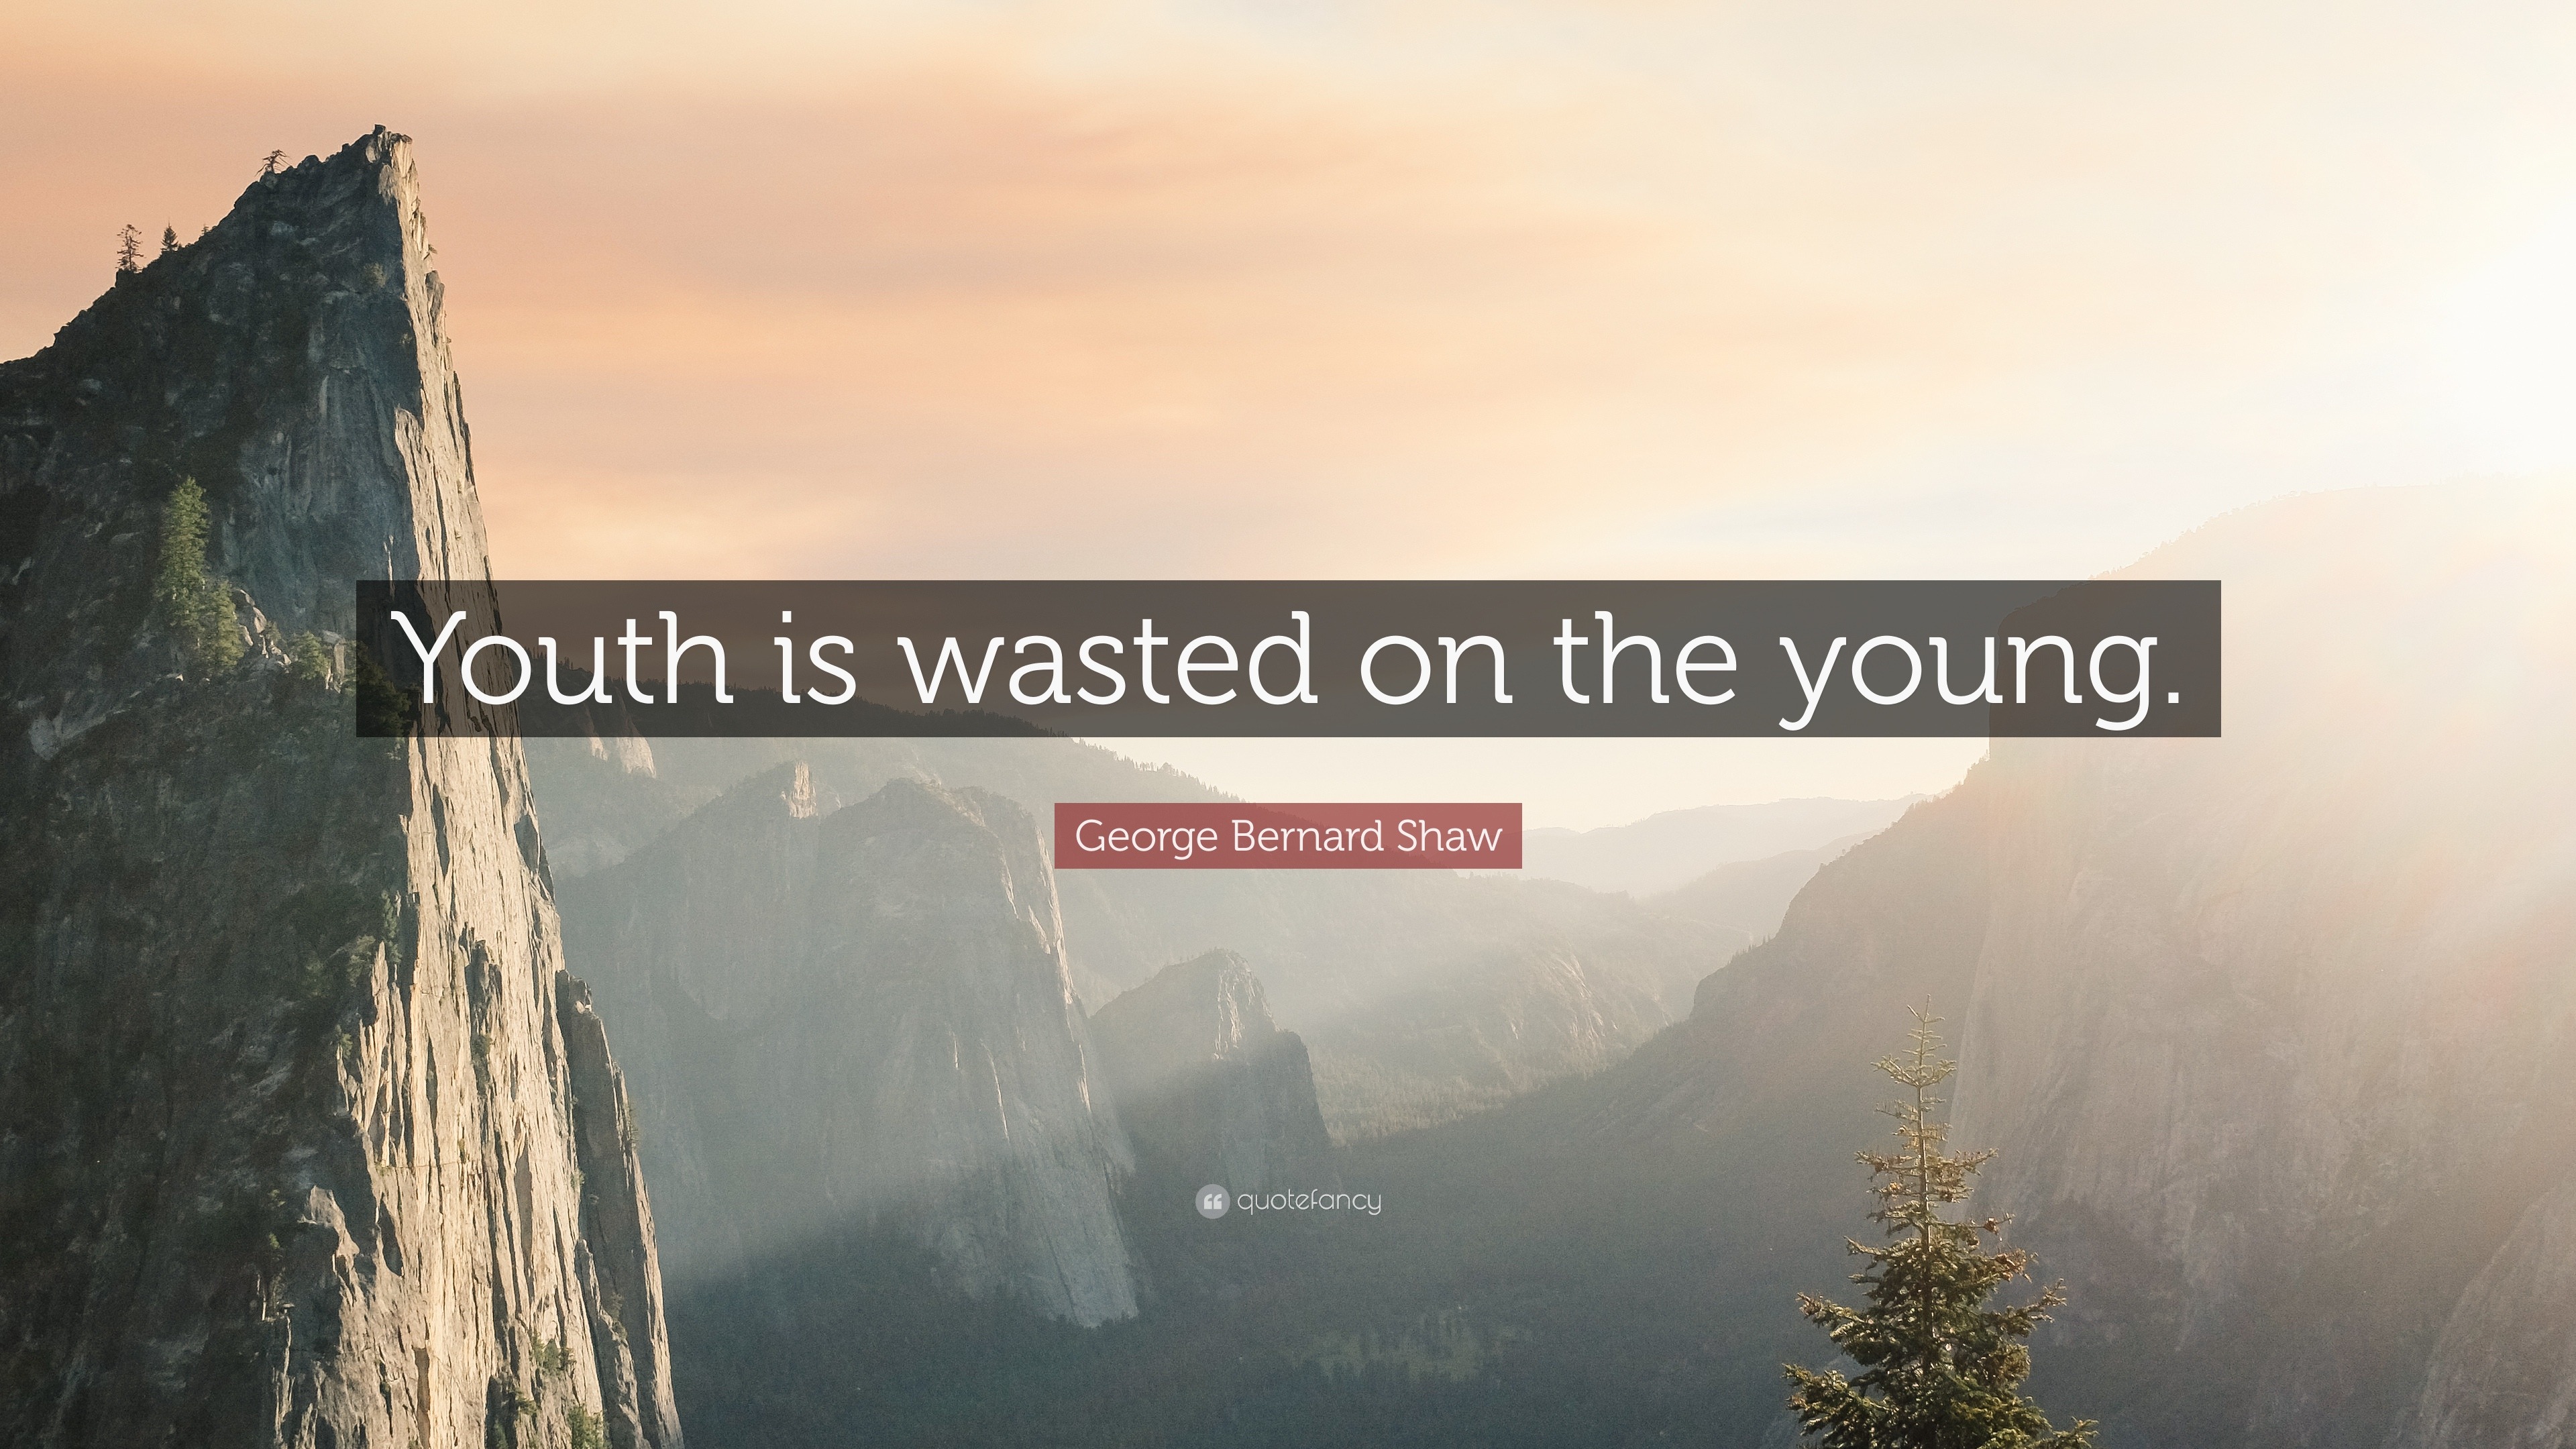 youth is wasted on the young quote